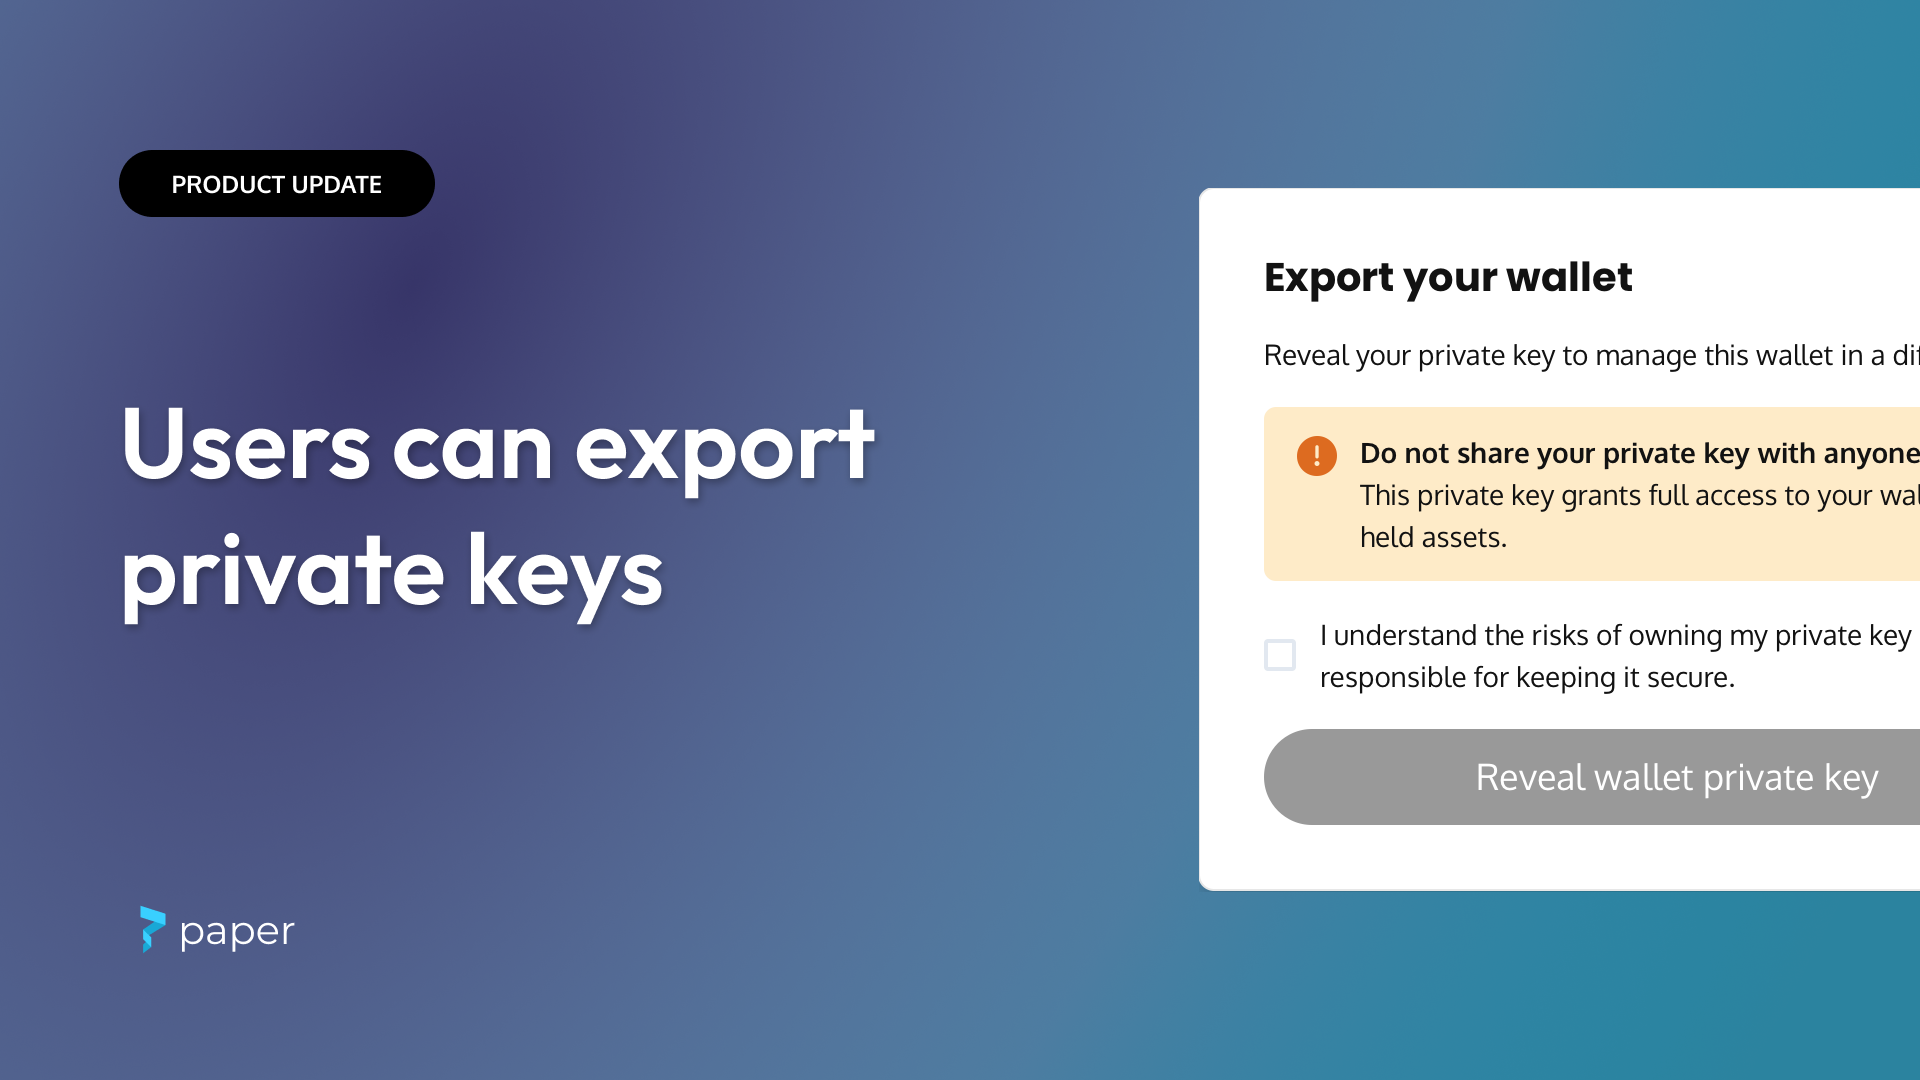 Add the ability to export private key for embedded wallets